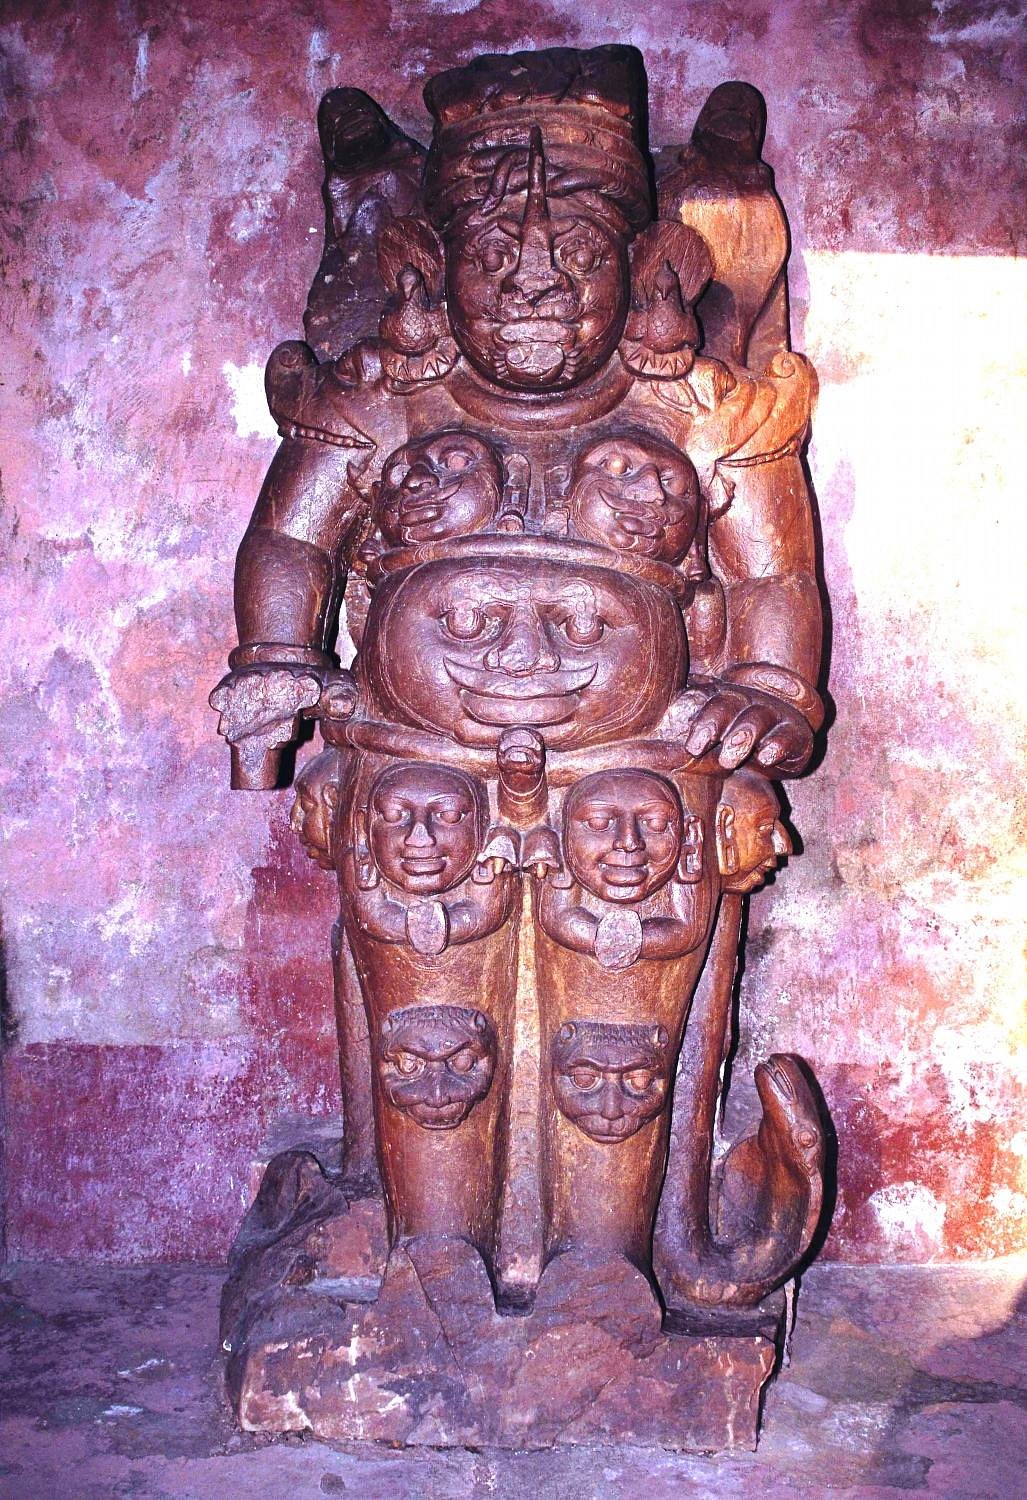 Rudra Shiva Statue (Bilaspur) - All You Need to Know BEFORE You Go